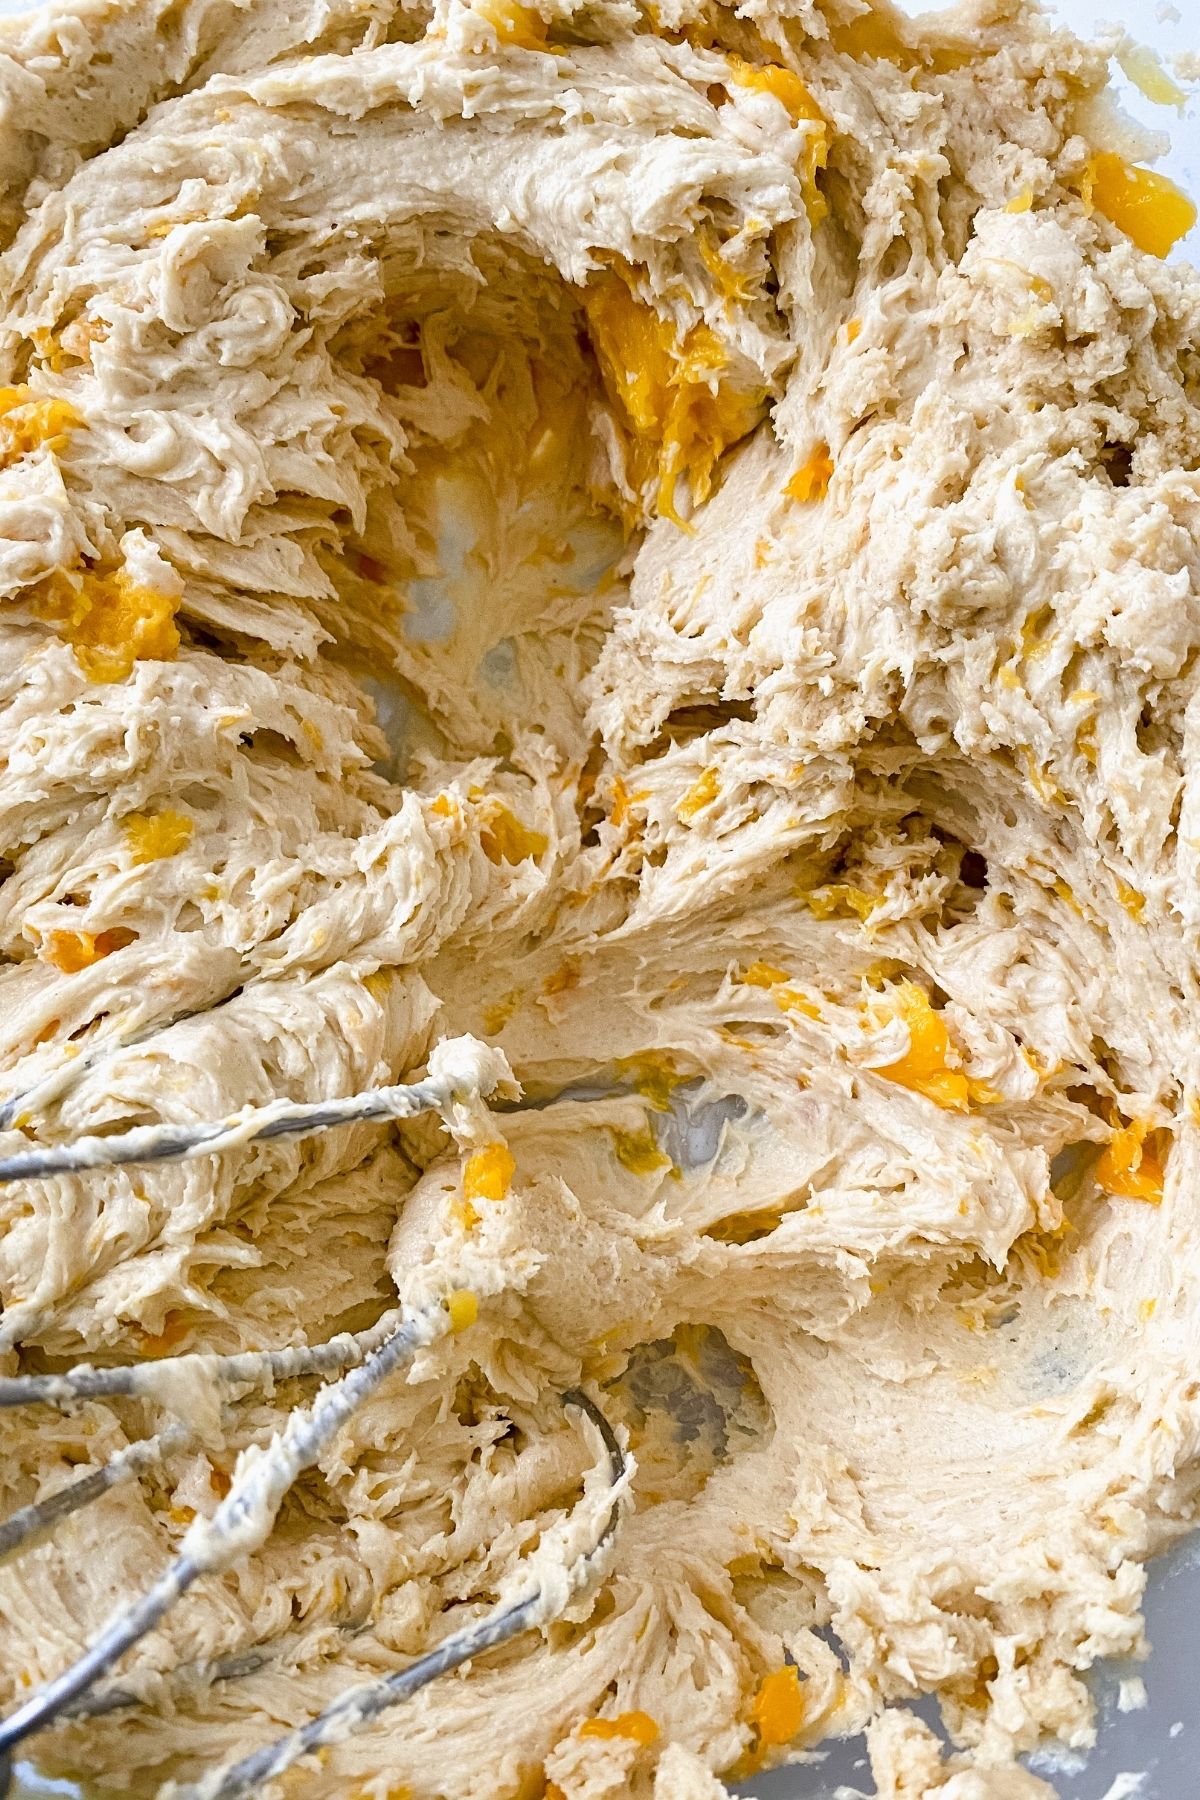 Cookie dough with peach pieces showing by beater